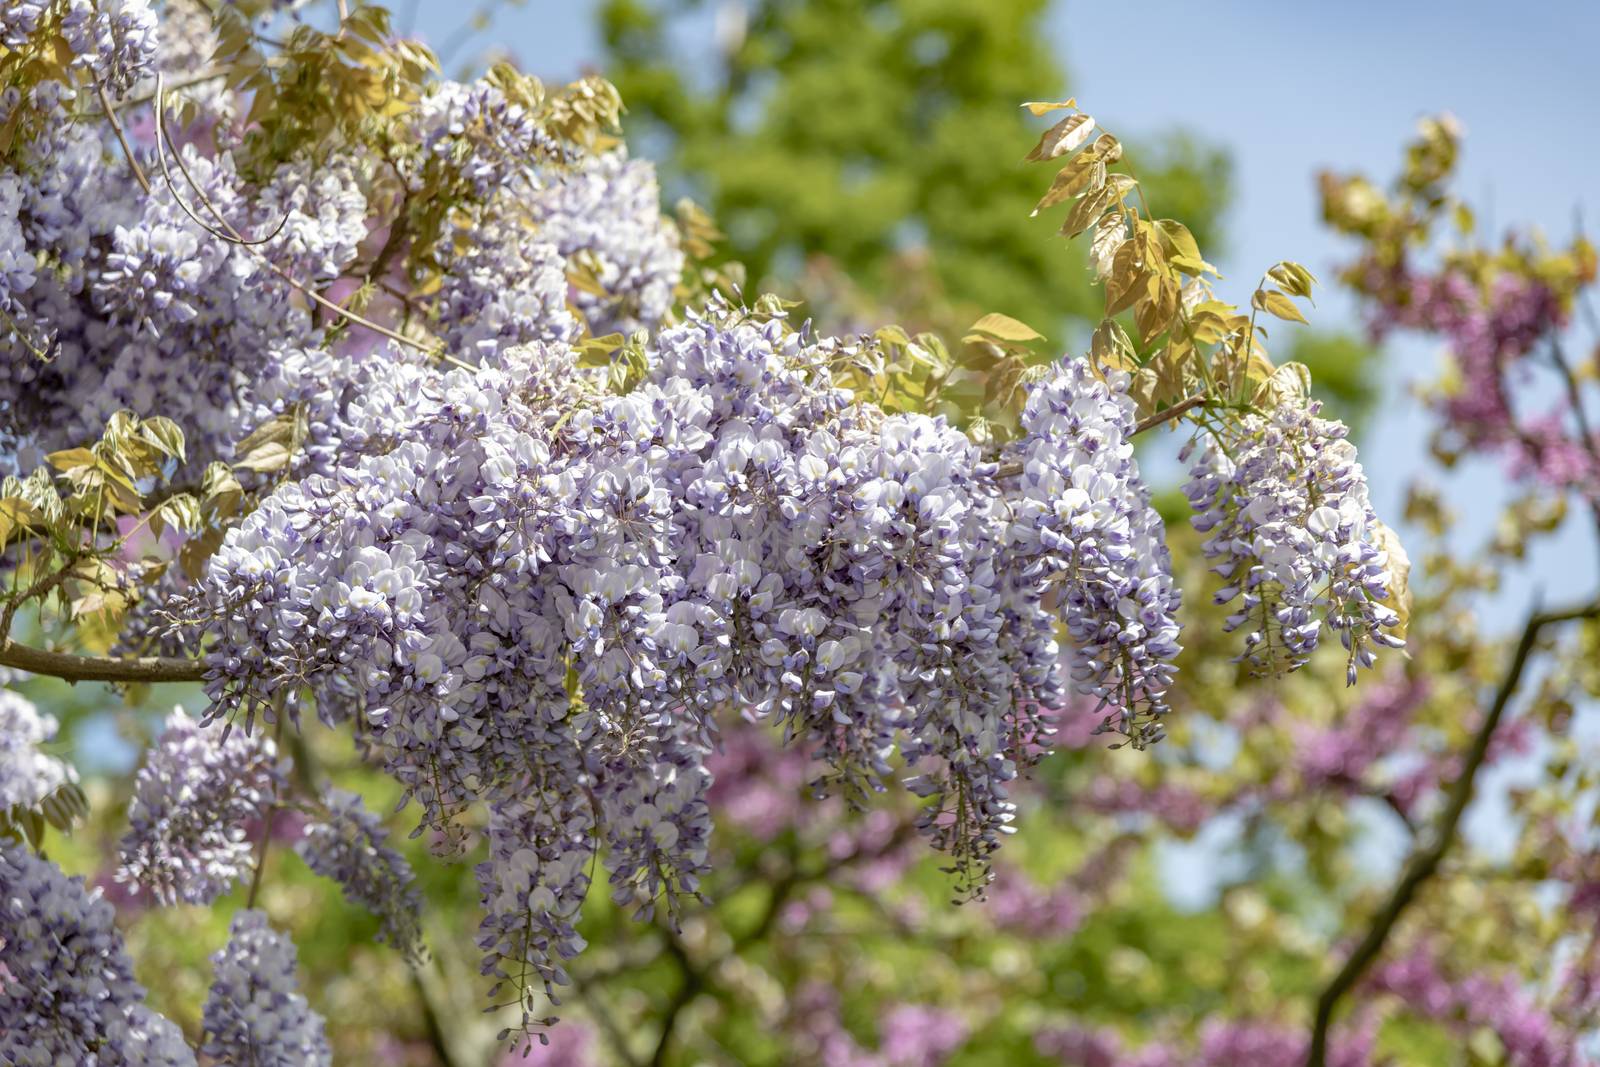 Purple Wisteria or glycine flowering plants in the legume family, Fabaceae (Leguminosae), that includes ten species of woody climbing bines that are native to China by ankorlight